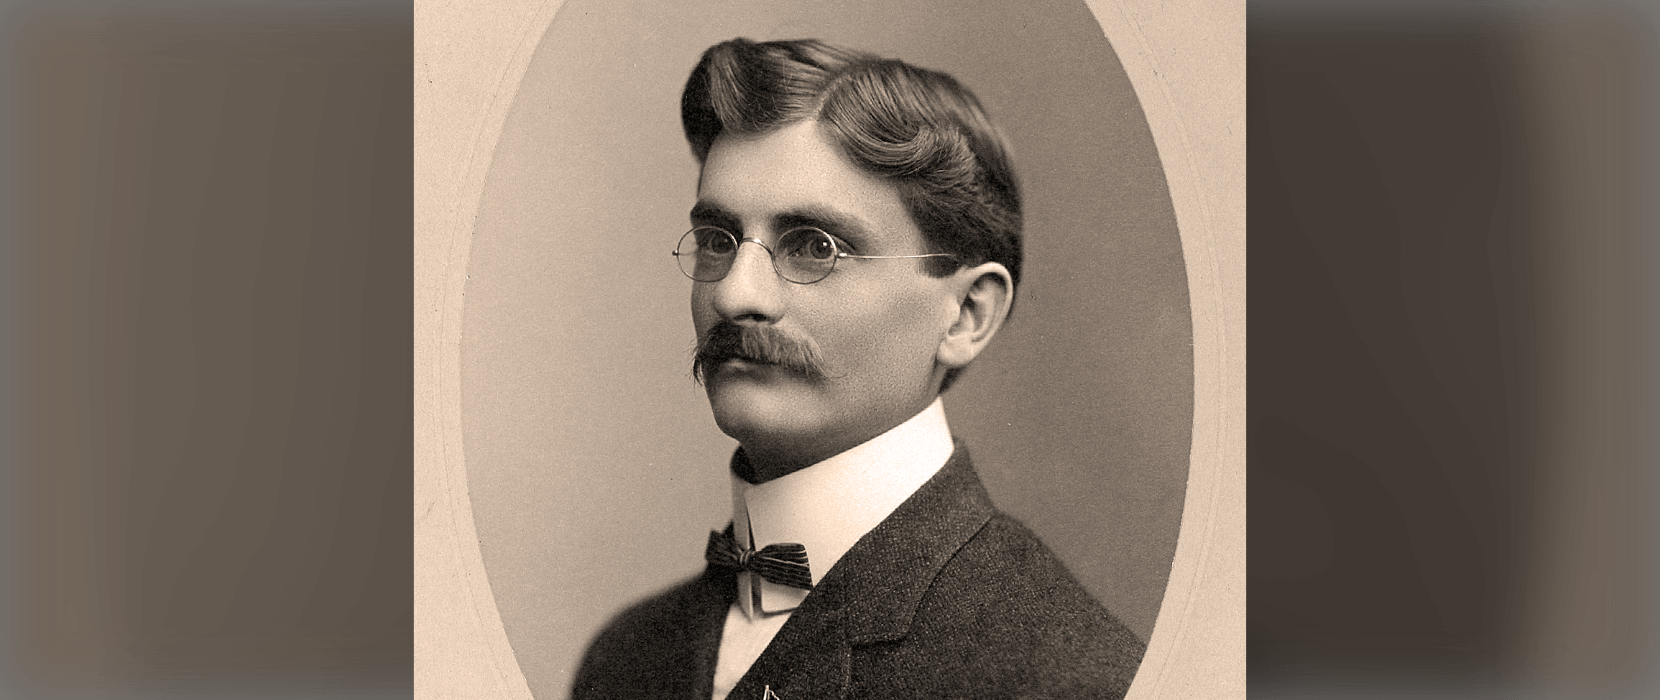 Sepia tone image of man with a mustache and glasses